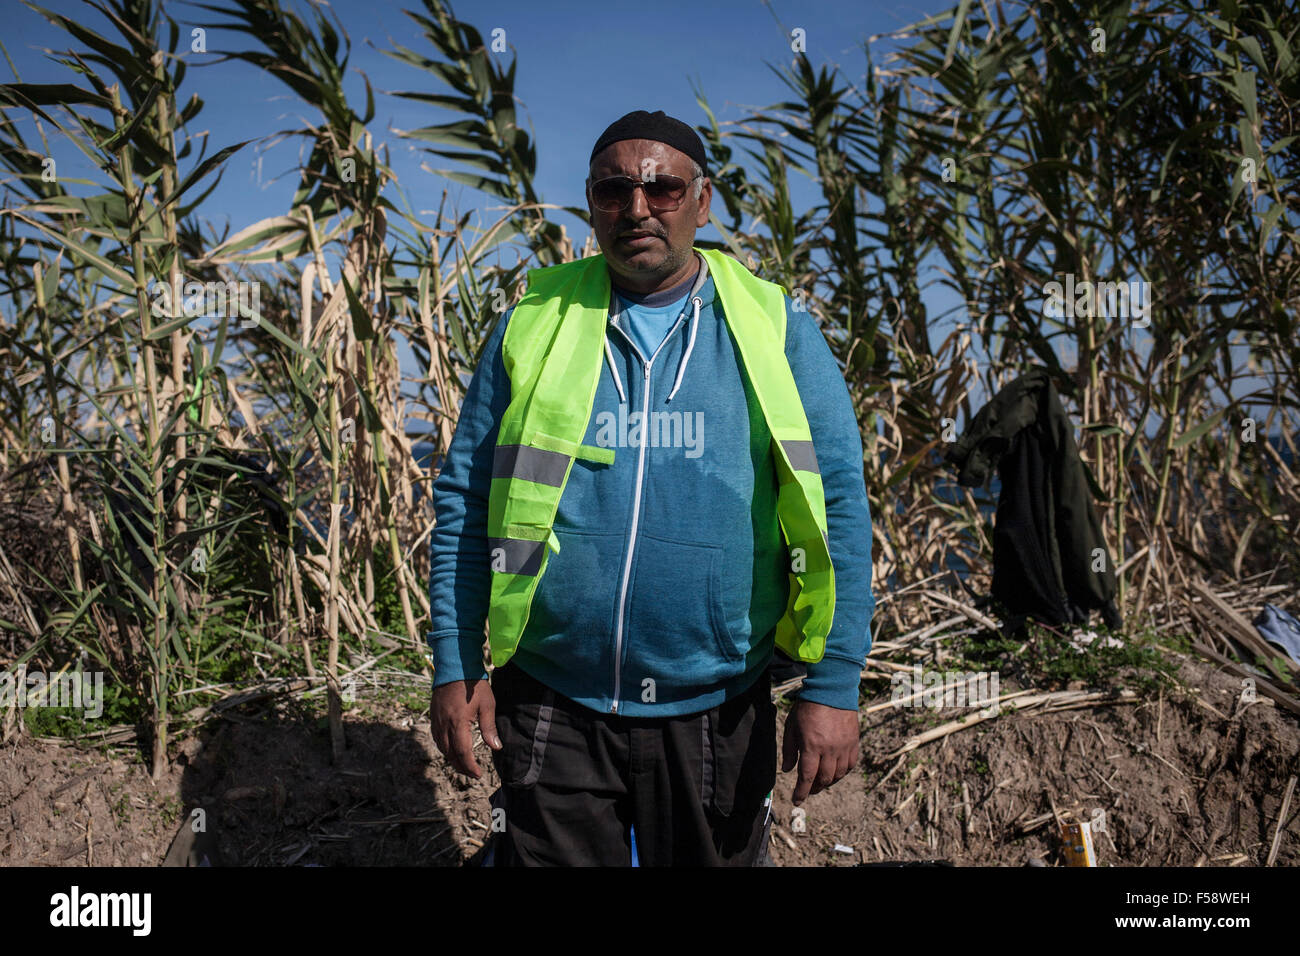 Lesvos, Greece. 30th Oct, 2015. Volunteer Khalid Mehmood, 48, came from Bolton near Manchester in the UK to help the refugees that reach the island of Lesvos, Greece, 30 October 2015. «We are sure that far more people are dying every night than is publicly known», he says. Lesvos, Greece, on the 30th of October 2015. Foto: Socrates Baltagiannis/dpa/Alamy Live News Stock Photo